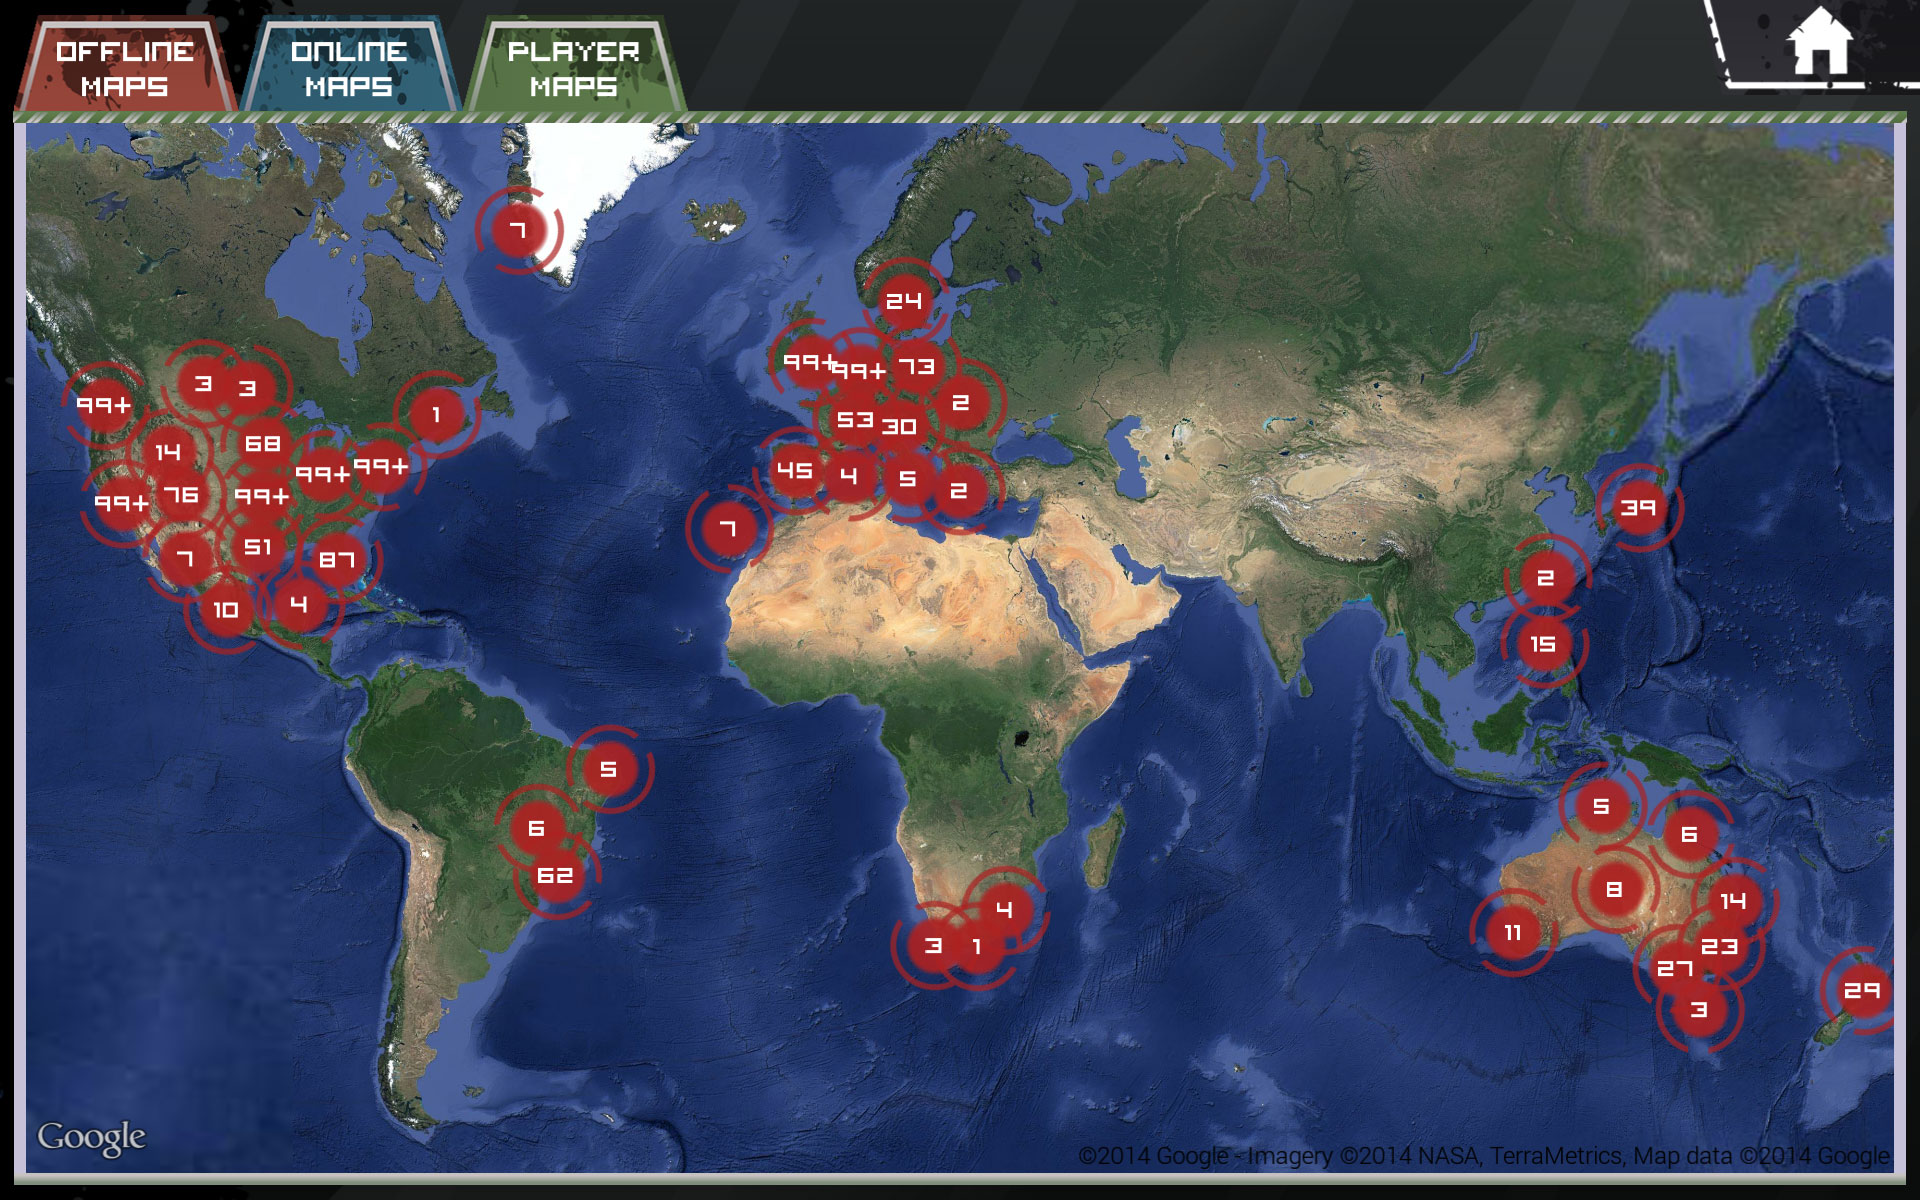 Class 3 Outbreak - Zombie Outbreak Simulator on Android.